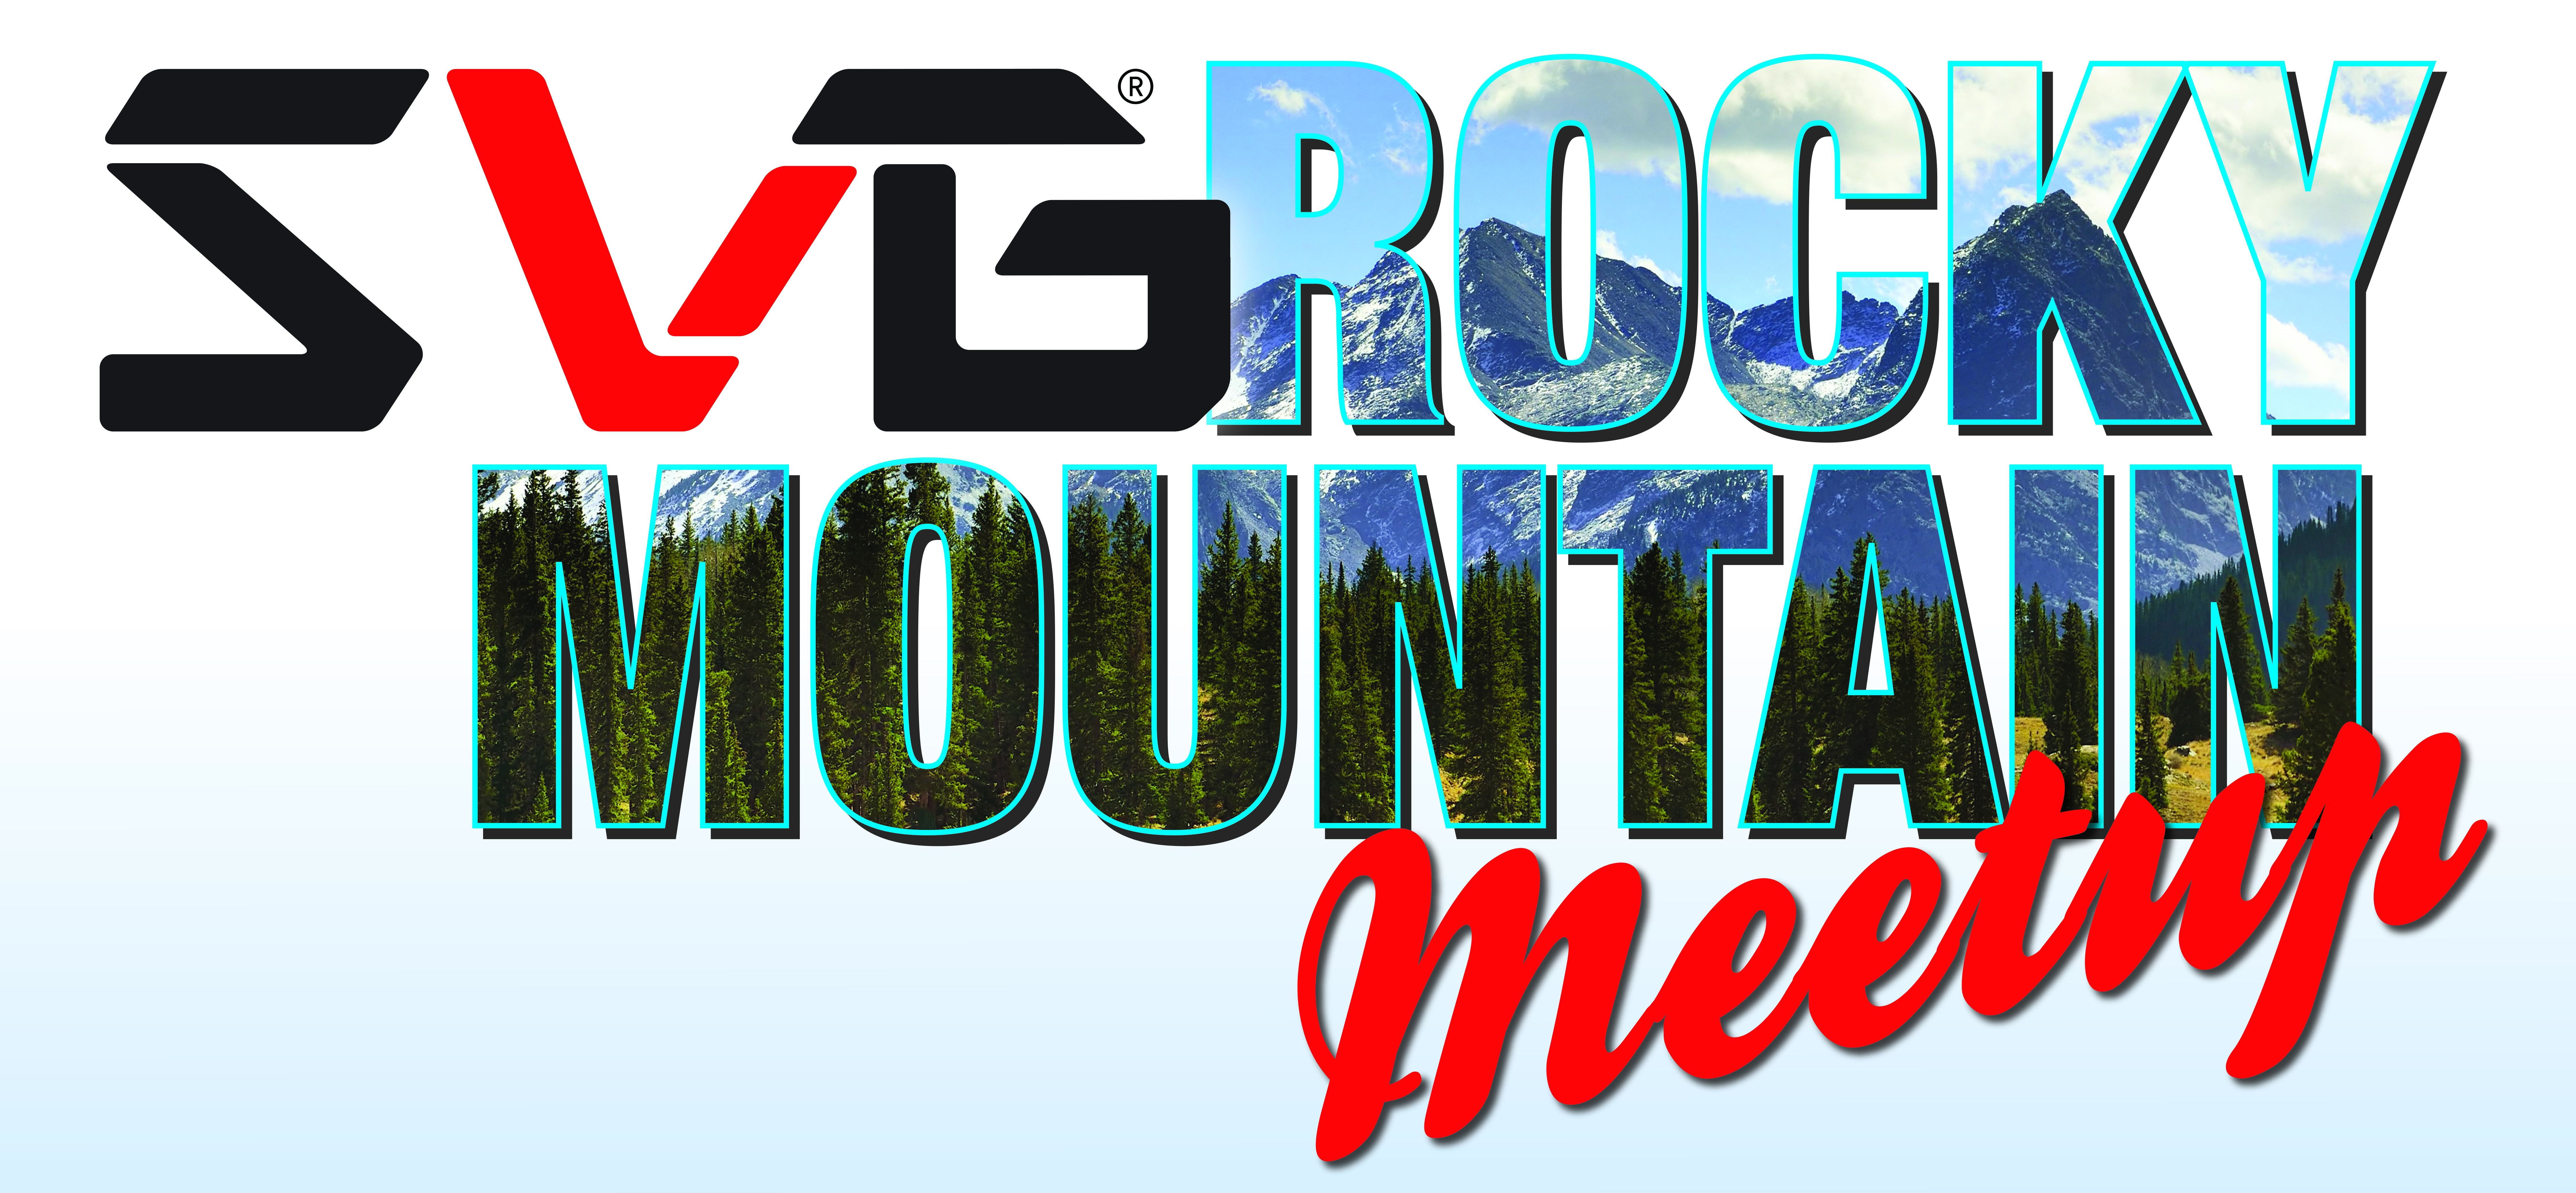 Rocky Mountains svg #11, Download drawings